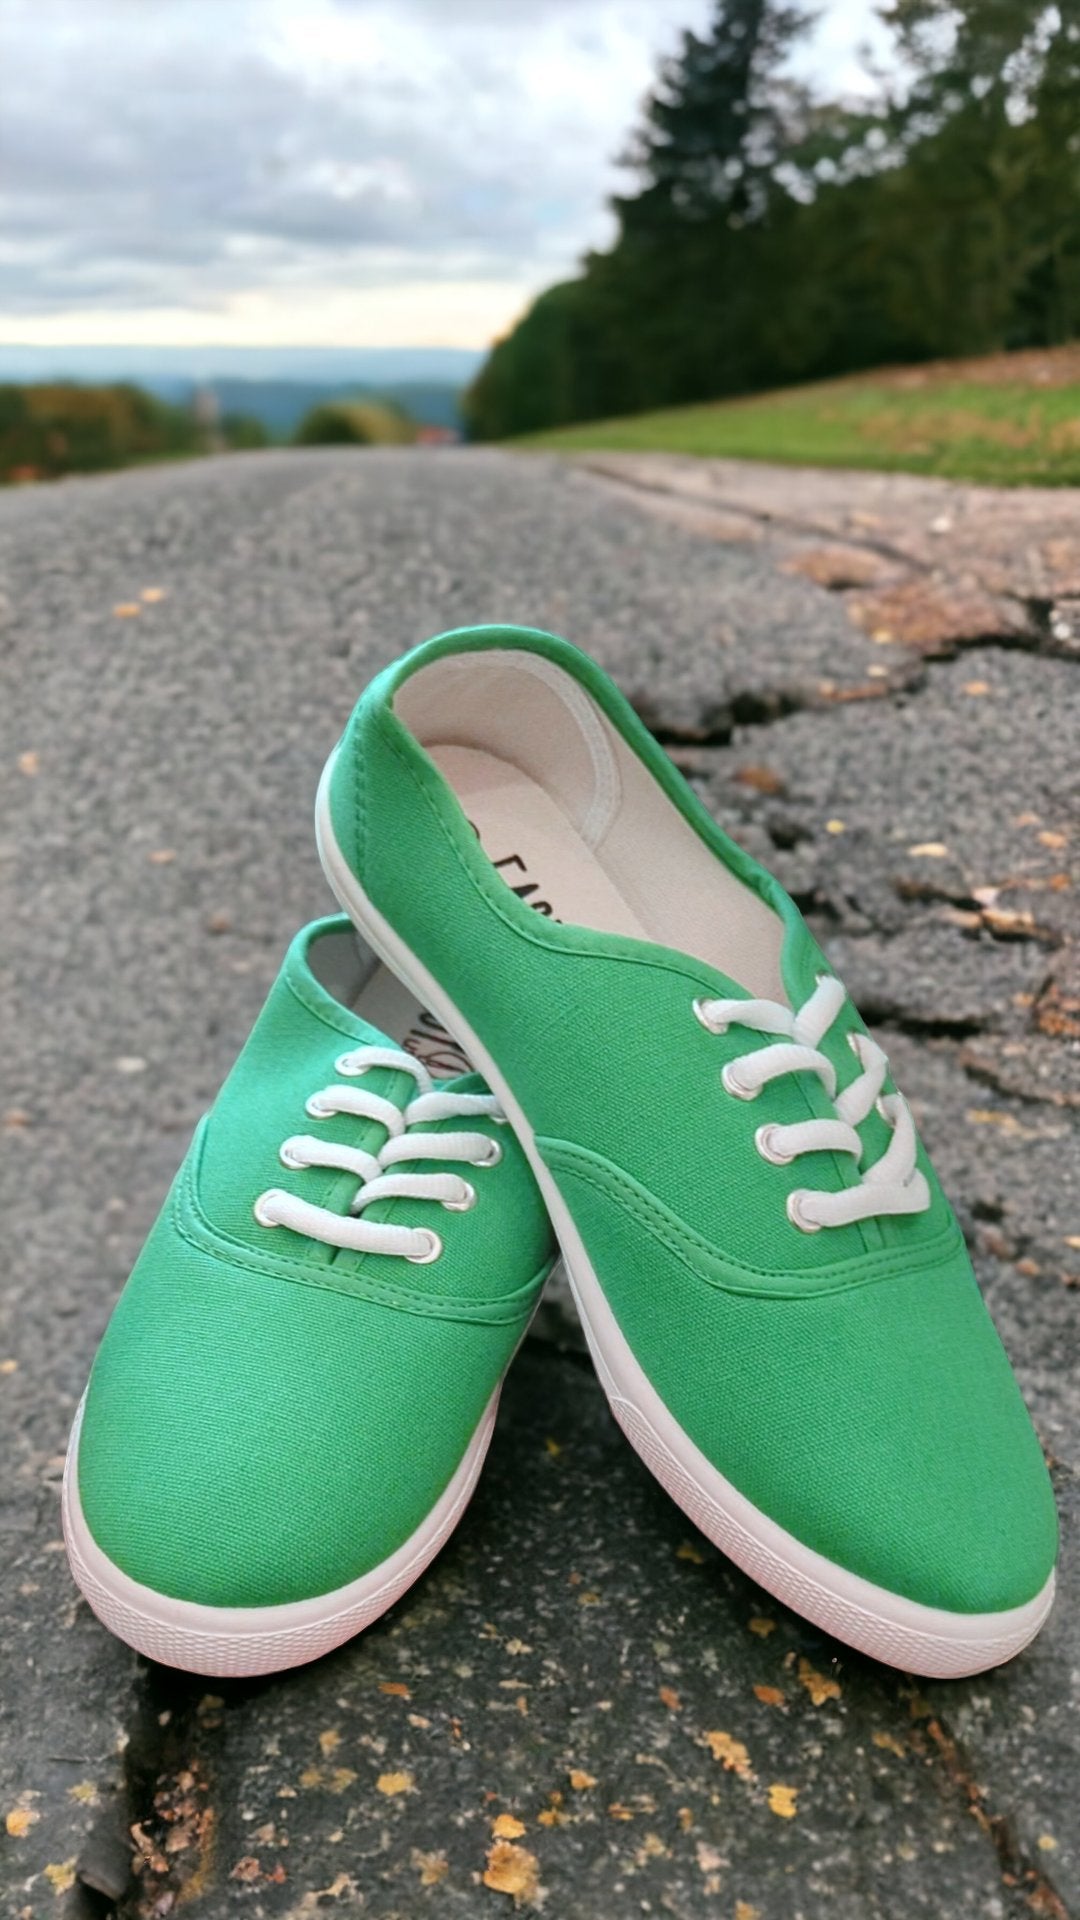 green sneakers sit in a paved road that disappears over the horizon